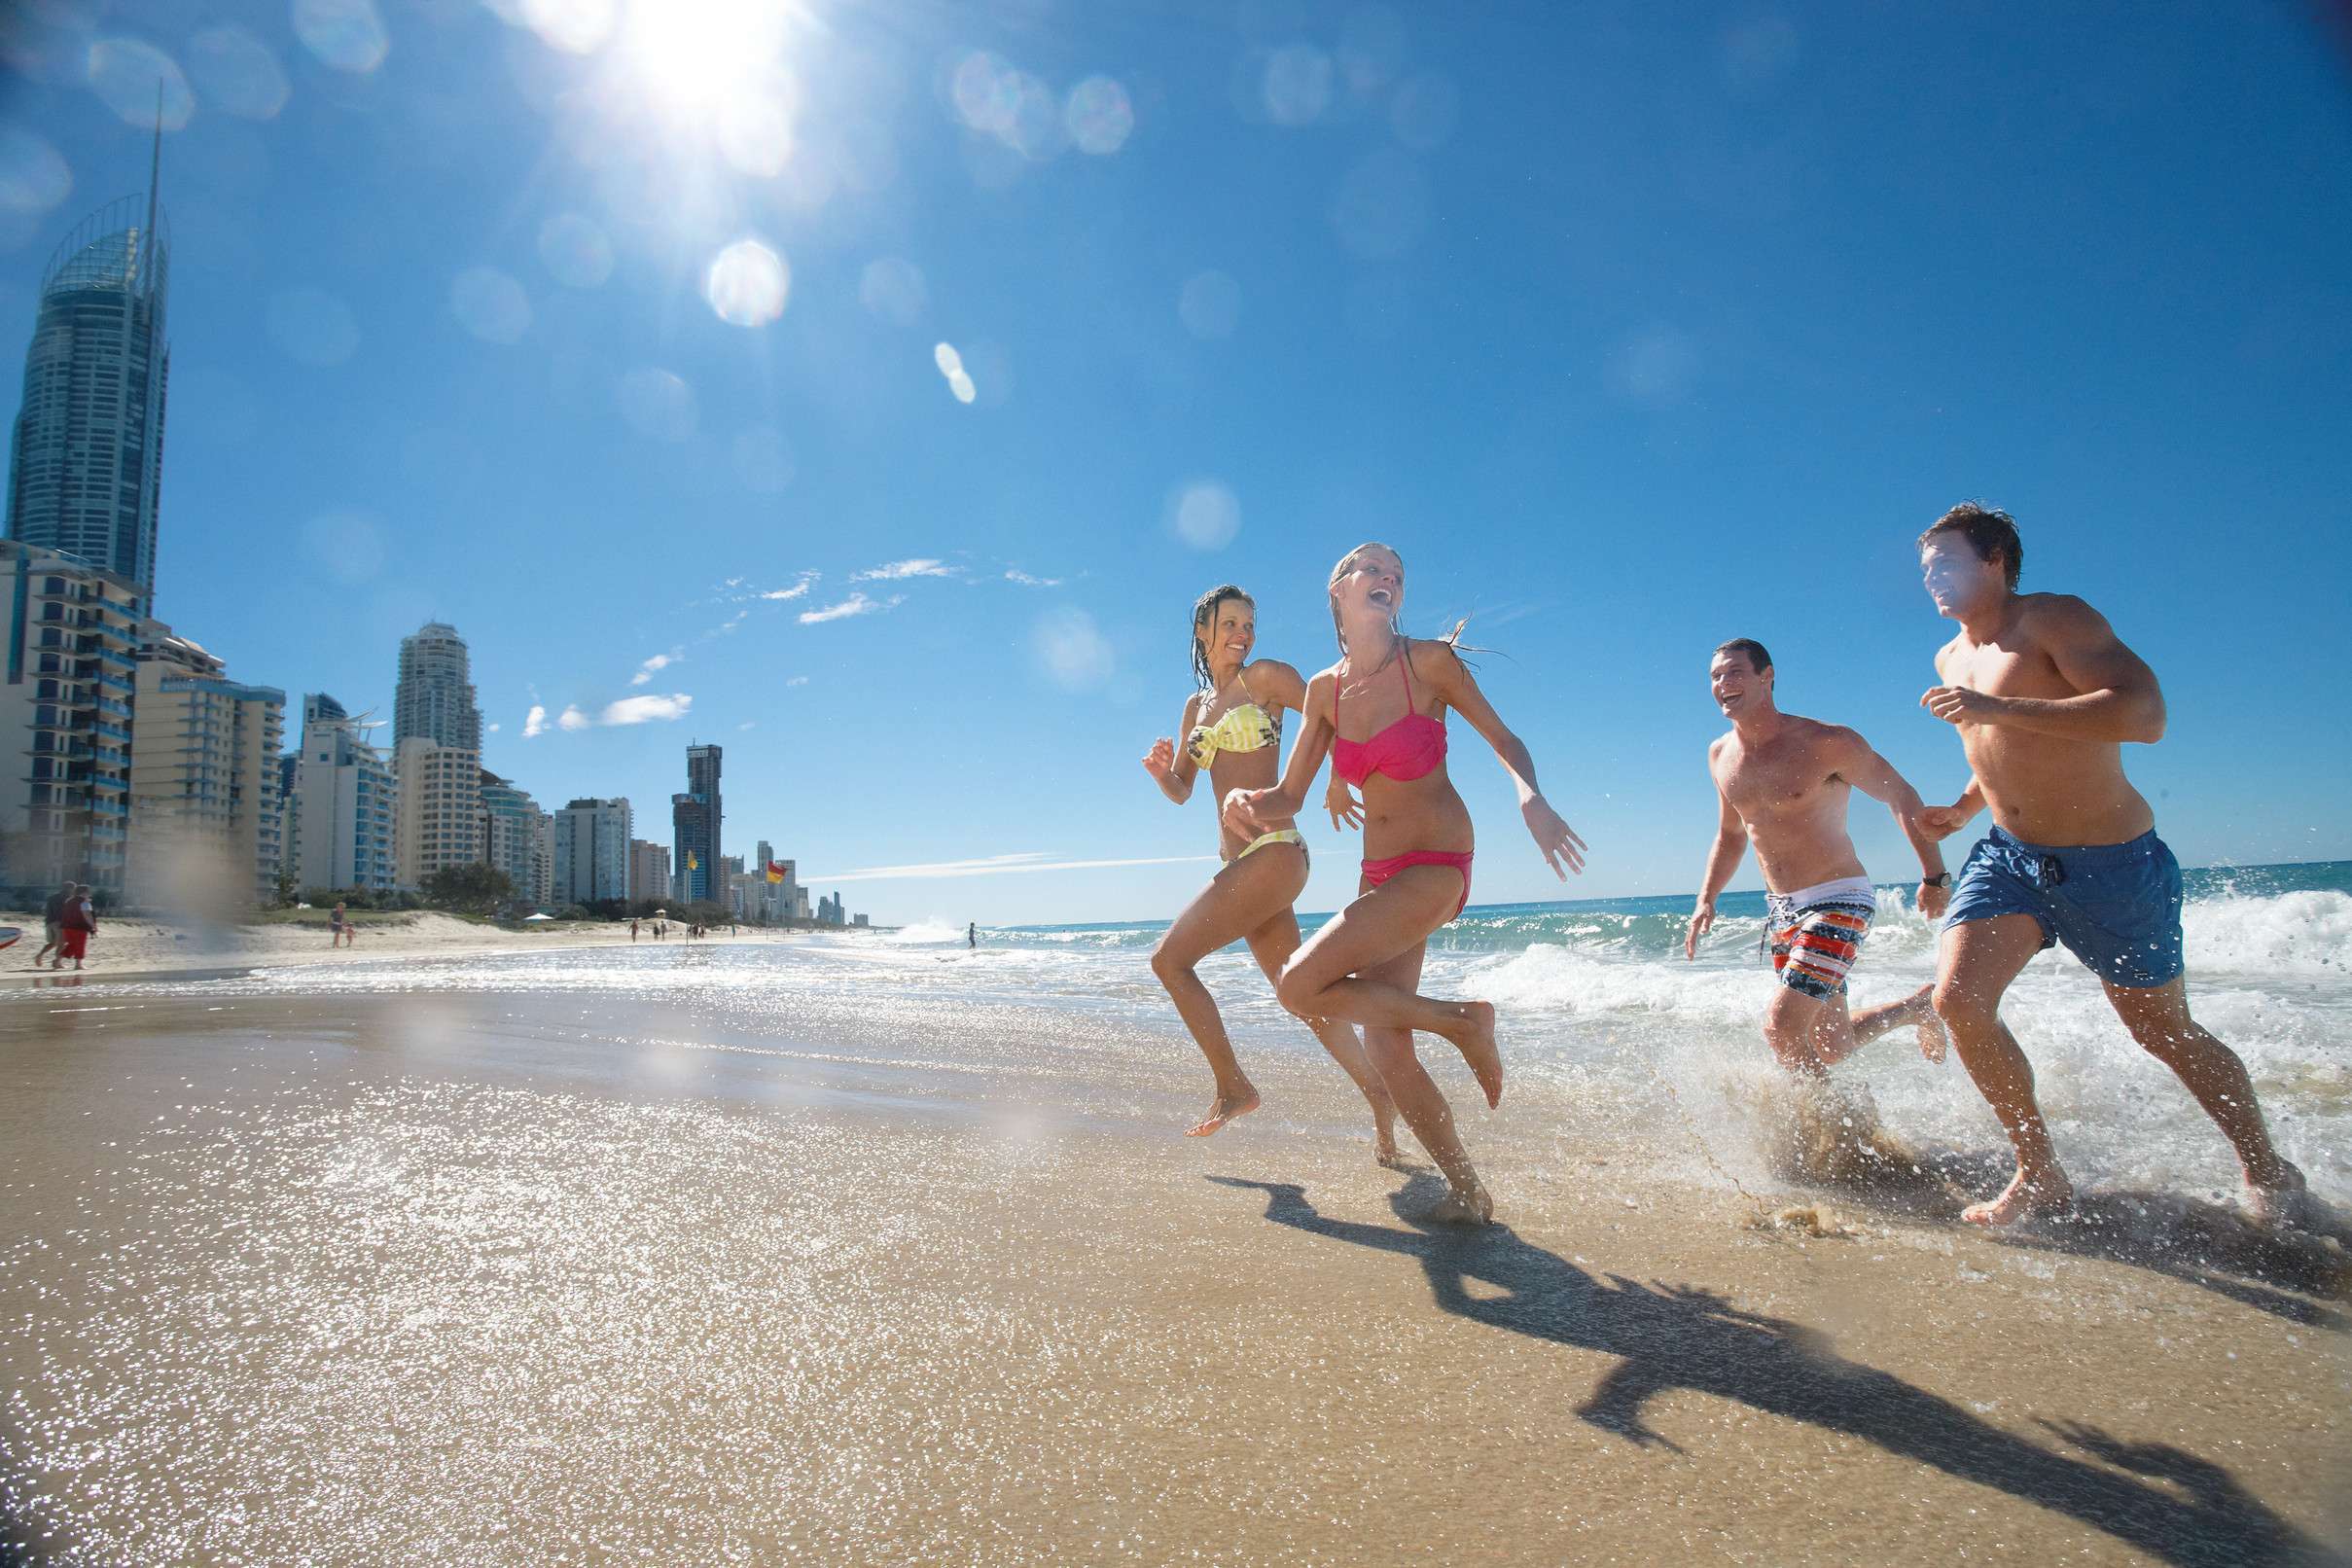 Not surprisingly, Surfers Paradise is the most visited Gold Coast Region